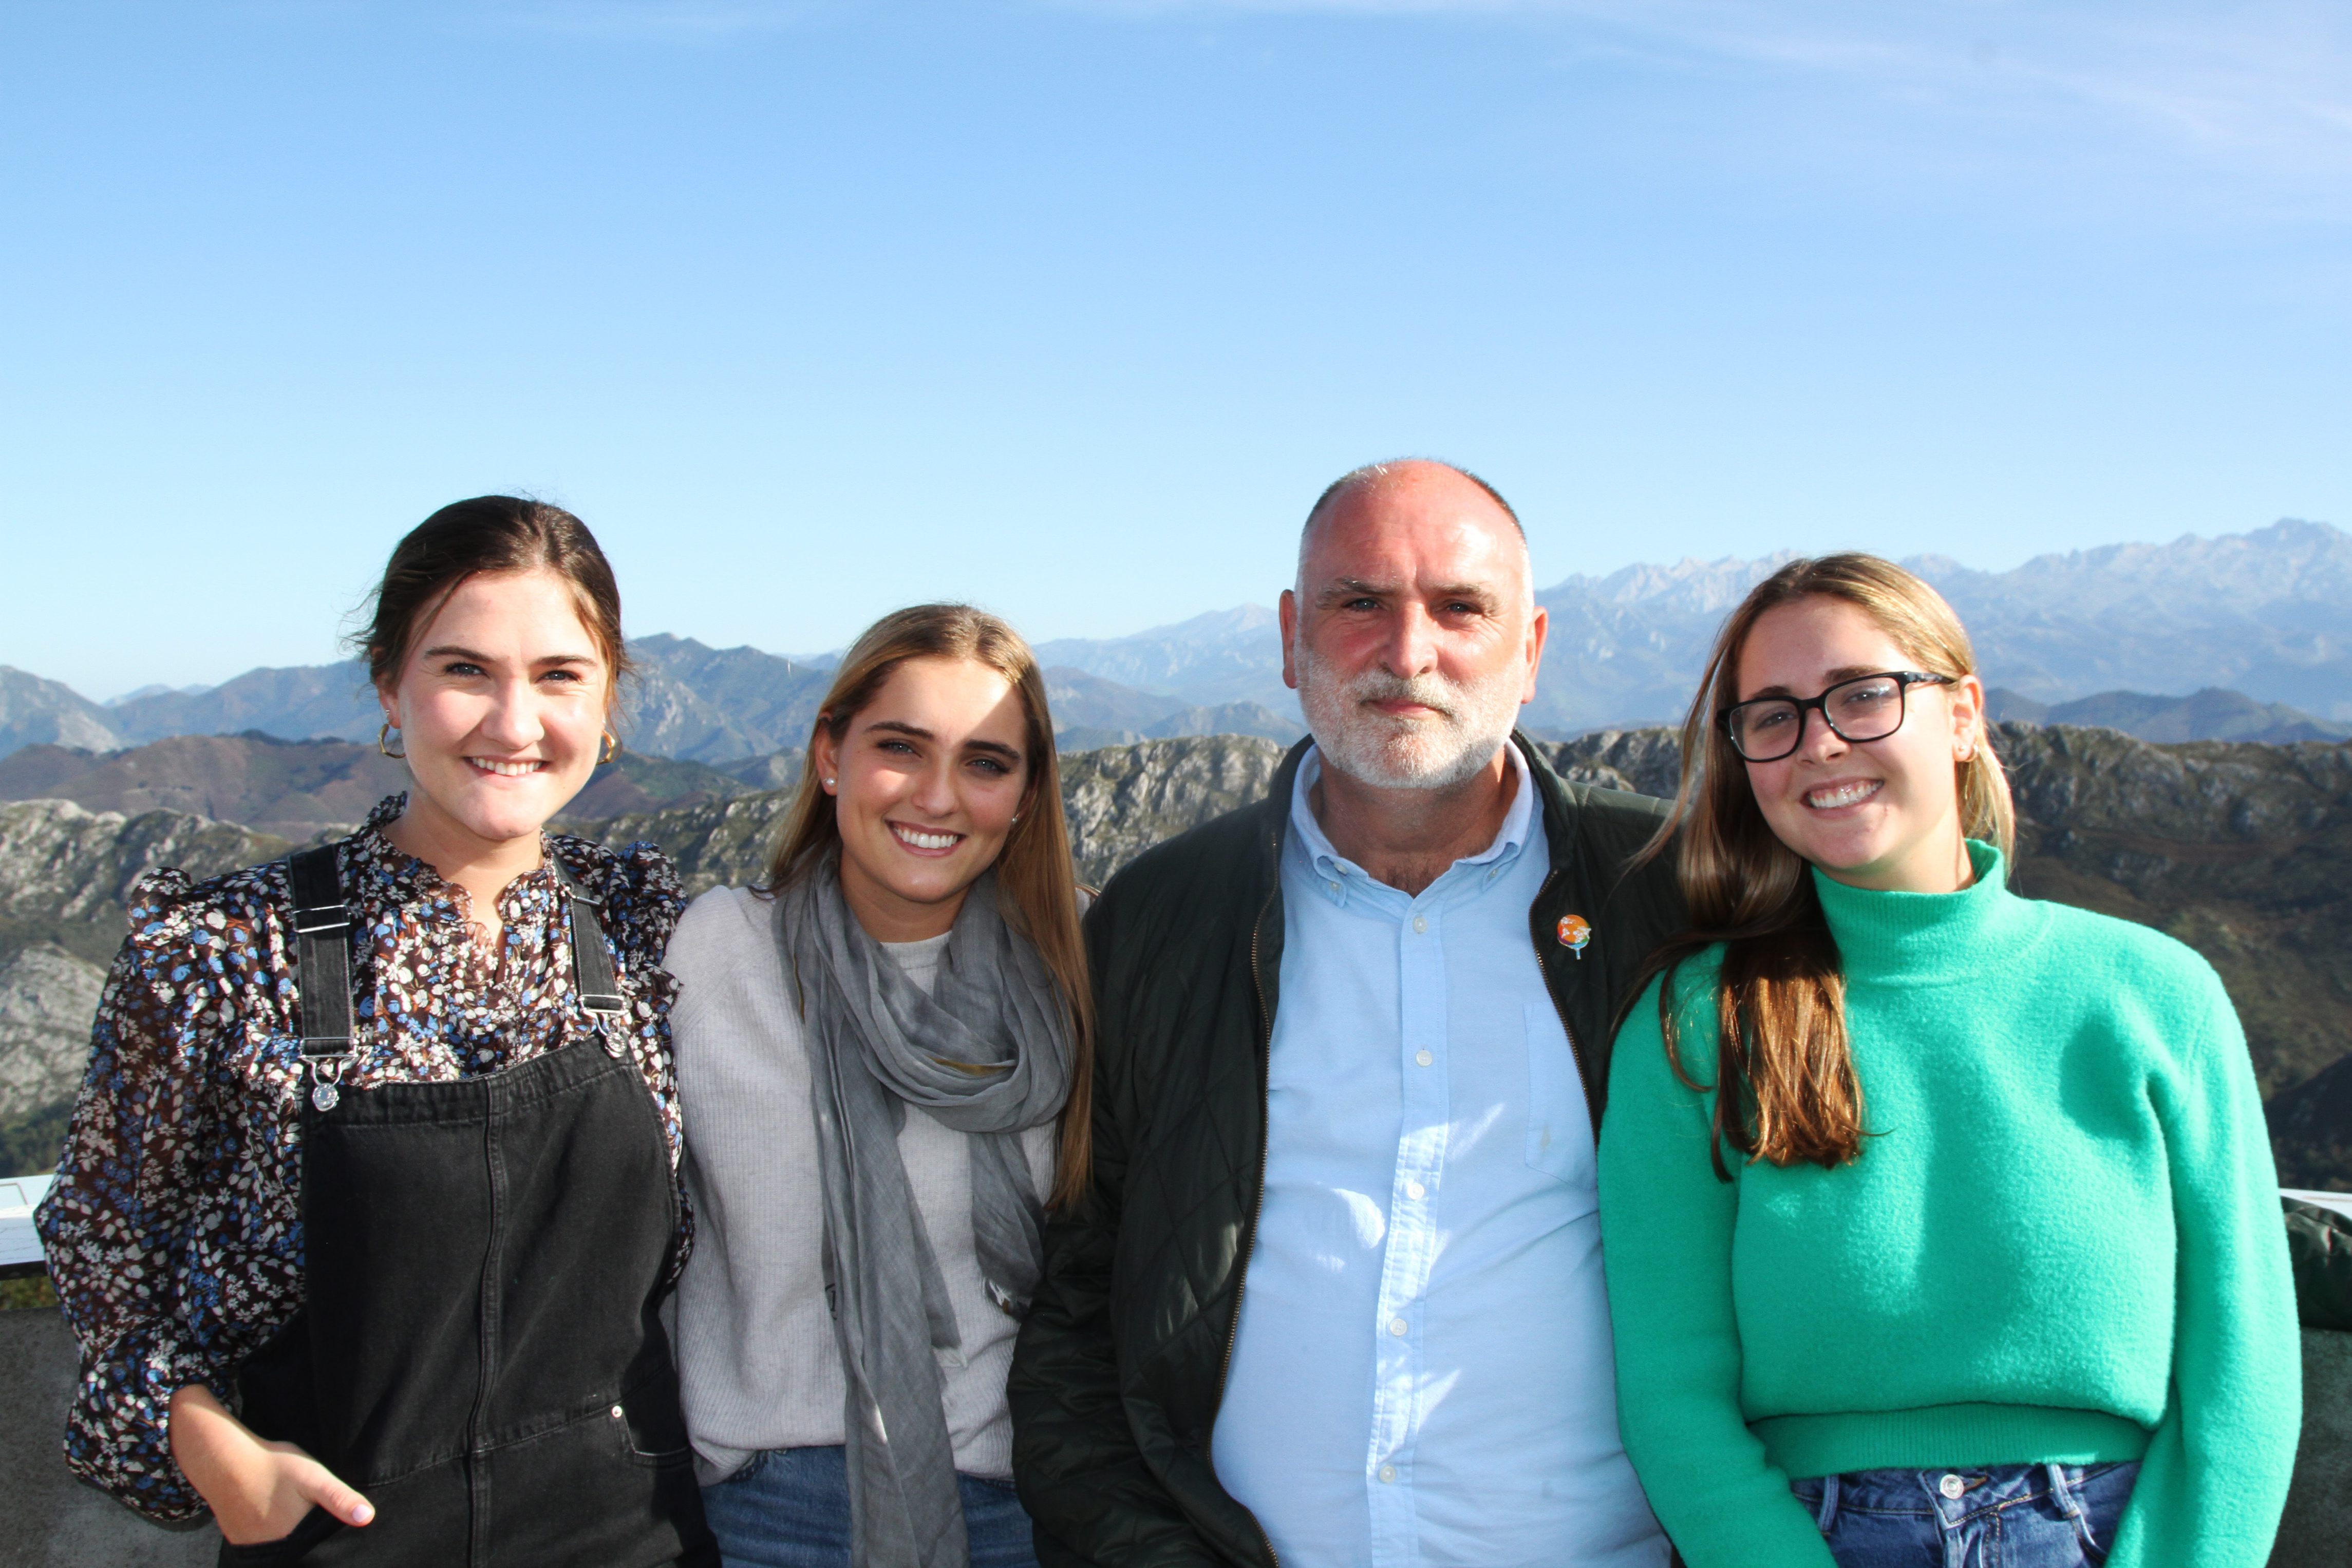 Chef Jose Andres with his daughters